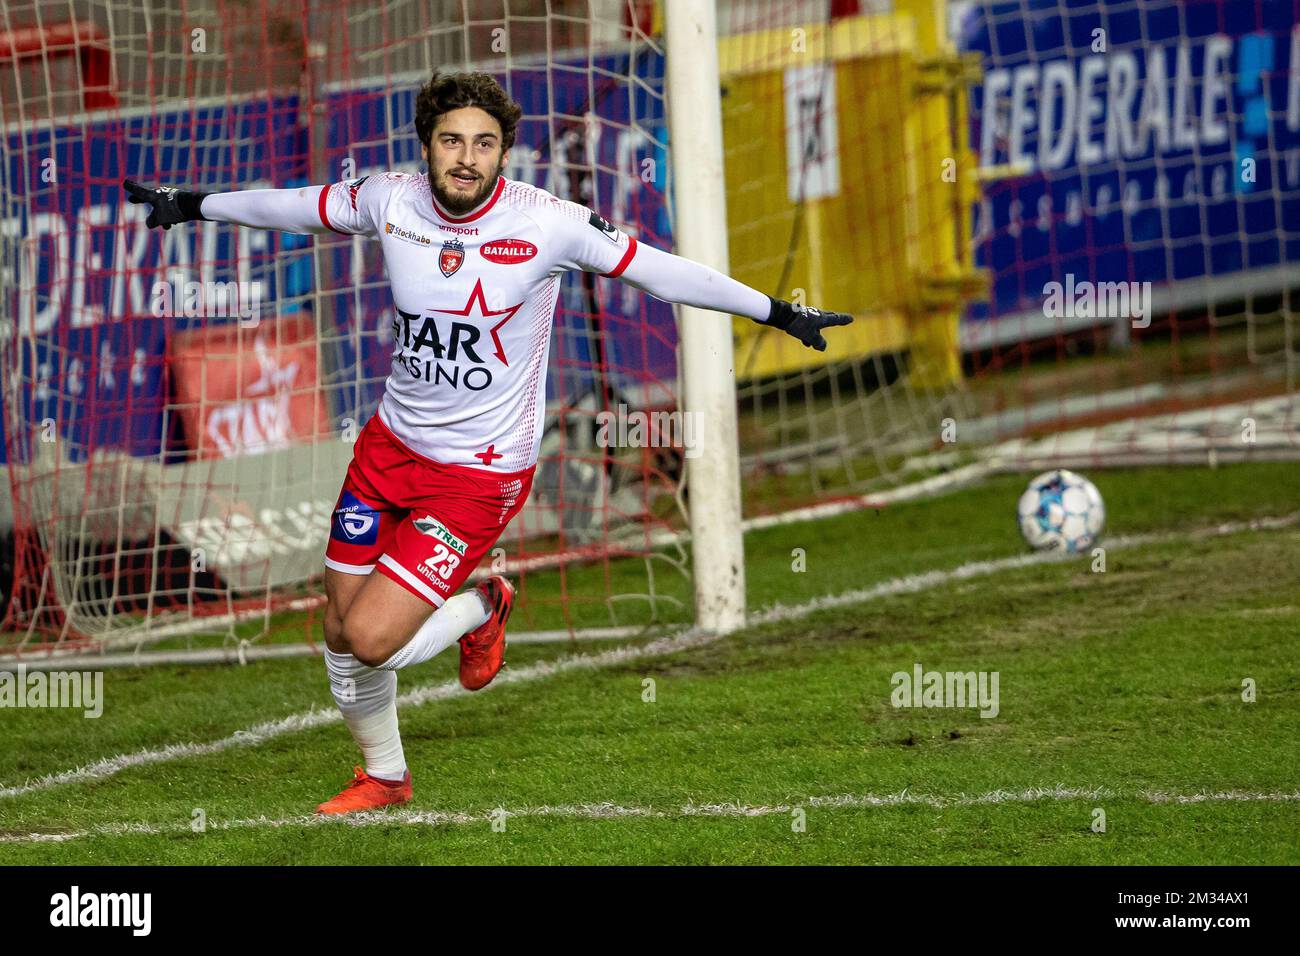 Mouscron's Bruno Xadas Alexandre Vieira Almeida celebrates after scoring during a soccer match between Royal Excel Mouscron and RSC Anderlecht, Tuesday 26 January 2021 in Mouscron, on day 22 of the 'Jupiler Pro League' first division of the Belgian championship. BELGA PHOTO KURT DESPLENTER Stock Photo